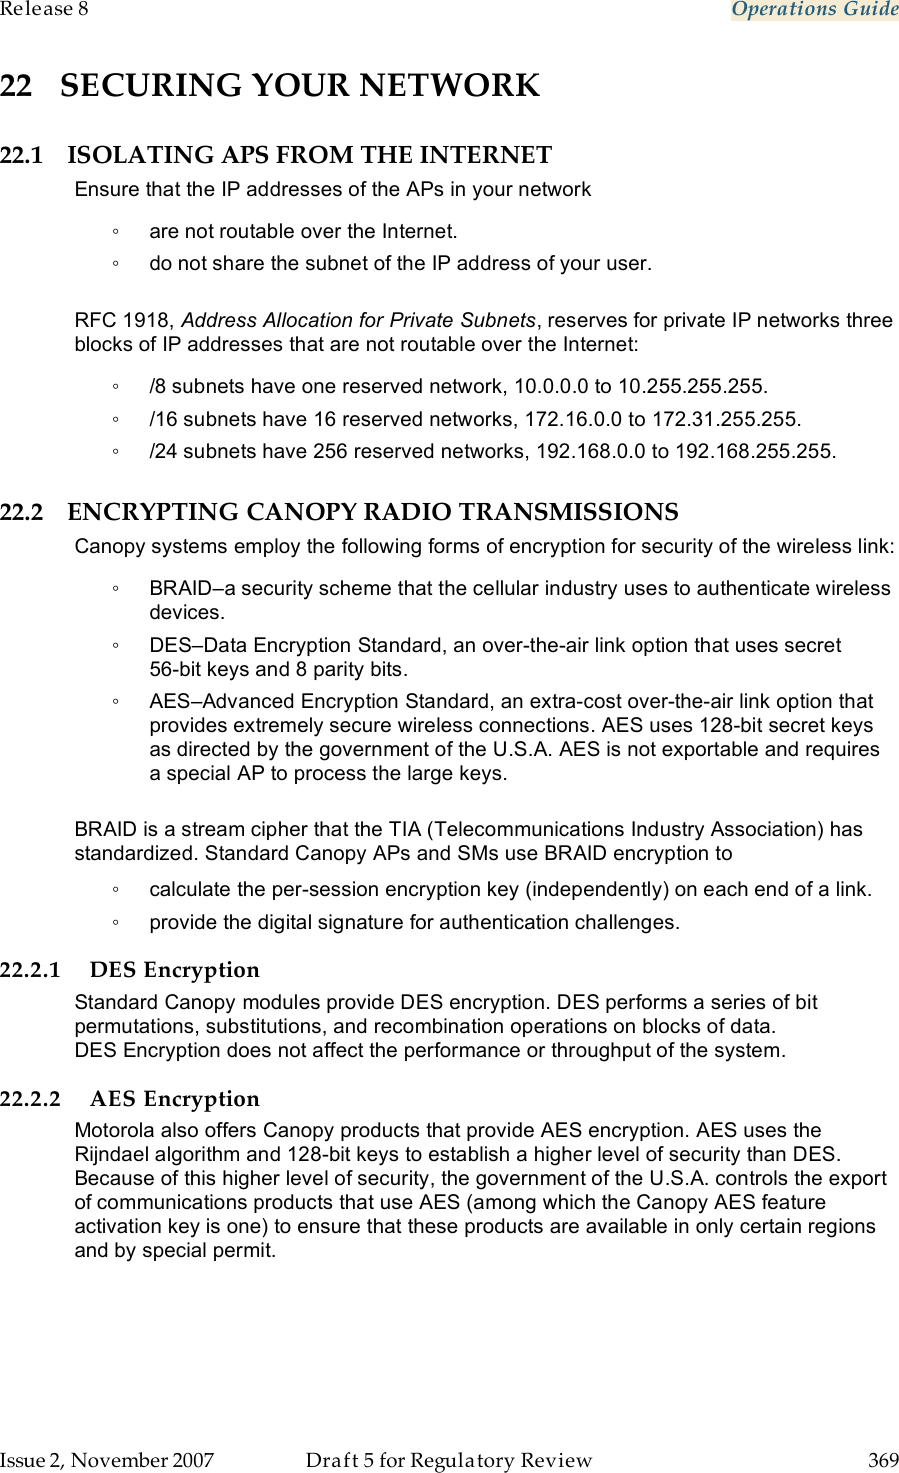 Release 8    Operations Guide   Issue 2, November 2007  Draft 5 for Regulatory Review  369     22 SECURING YOUR NETWORK 22.1 ISOLATING APS FROM THE INTERNET Ensure that the IP addresses of the APs in your network ◦  are not routable over the Internet. ◦  do not share the subnet of the IP address of your user.  RFC 1918, Address Allocation for Private Subnets, reserves for private IP networks three blocks of IP addresses that are not routable over the Internet: ◦  /8 subnets have one reserved network, 10.0.0.0 to 10.255.255.255. ◦  /16 subnets have 16 reserved networks, 172.16.0.0 to 172.31.255.255. ◦  /24 subnets have 256 reserved networks, 192.168.0.0 to 192.168.255.255. 22.2 ENCRYPTING CANOPY RADIO TRANSMISSIONS Canopy systems employ the following forms of encryption for security of the wireless link: ◦  BRAID–a security scheme that the cellular industry uses to authenticate wireless devices. ◦  DES–Data Encryption Standard, an over-the-air link option that uses secret  56-bit keys and 8 parity bits. ◦  AES–Advanced Encryption Standard, an extra-cost over-the-air link option that provides extremely secure wireless connections. AES uses 128-bit secret keys as directed by the government of the U.S.A. AES is not exportable and requires a special AP to process the large keys.  BRAID is a stream cipher that the TIA (Telecommunications Industry Association) has standardized. Standard Canopy APs and SMs use BRAID encryption to ◦  calculate the per-session encryption key (independently) on each end of a link. ◦  provide the digital signature for authentication challenges. 22.2.1 DES Encryption Standard Canopy modules provide DES encryption. DES performs a series of bit permutations, substitutions, and recombination operations on blocks of data. DES Encryption does not affect the performance or throughput of the system. 22.2.2 AES Encryption Motorola also offers Canopy products that provide AES encryption. AES uses the Rijndael algorithm and 128-bit keys to establish a higher level of security than DES. Because of this higher level of security, the government of the U.S.A. controls the export of communications products that use AES (among which the Canopy AES feature activation key is one) to ensure that these products are available in only certain regions and by special permit.  